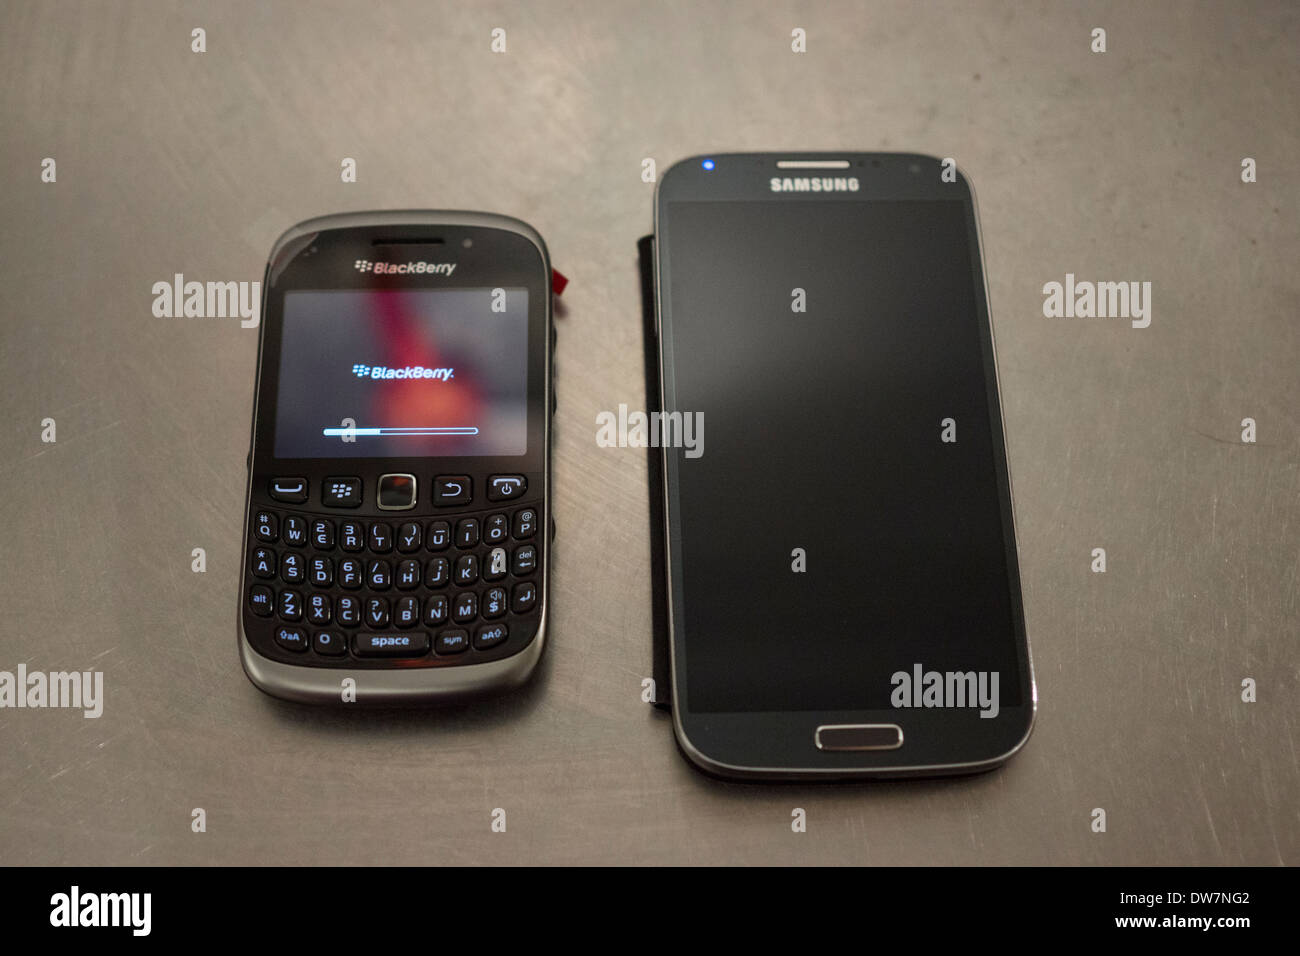 blackberry curve android samsung s4 phone Stock Photo - Alamy